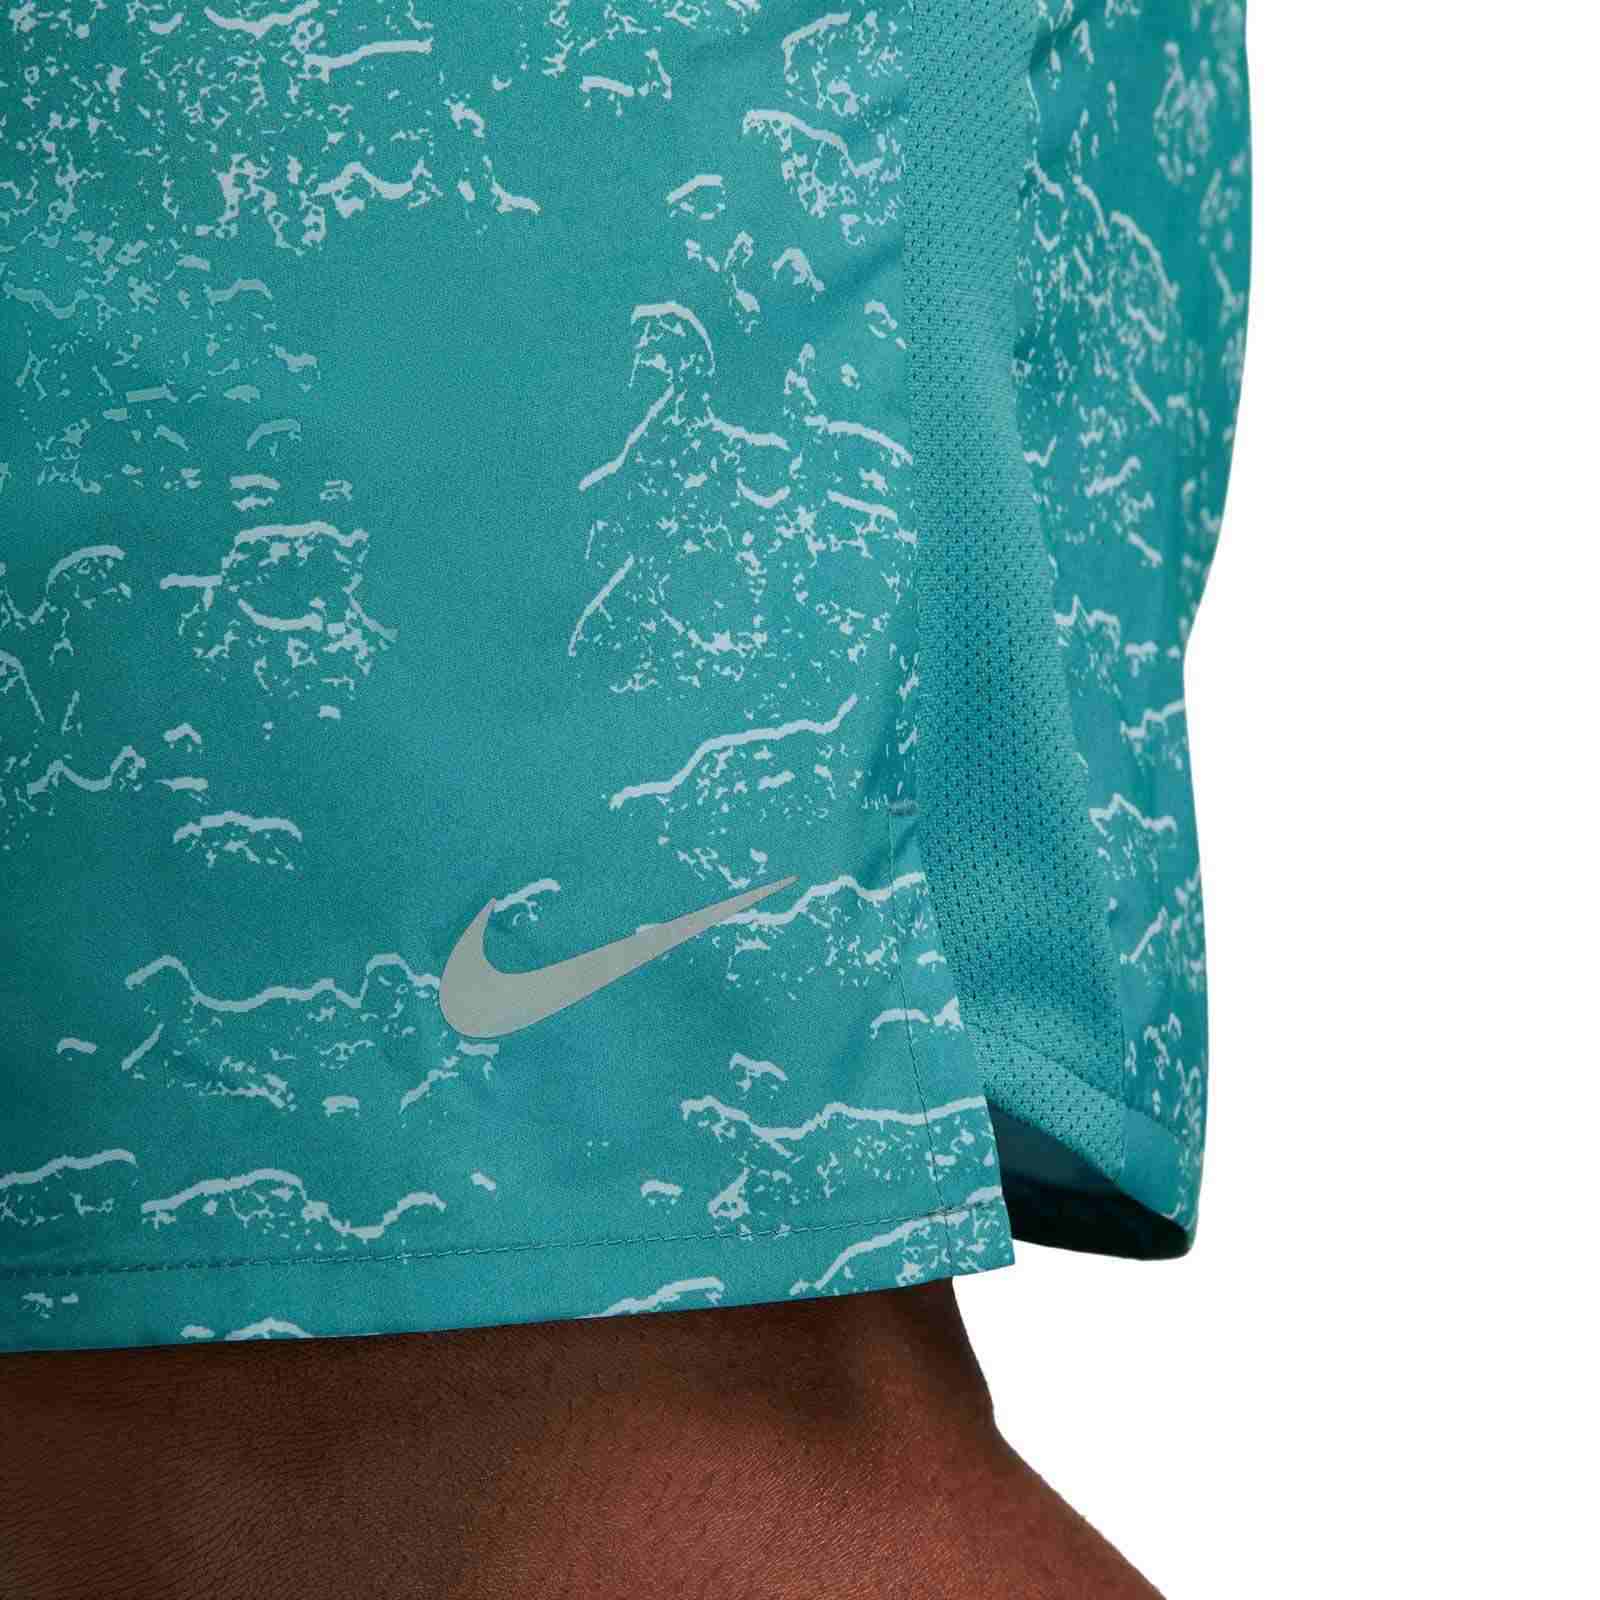 NIKE DRI-FIT RUN DIVISION CHALLENGER MENS 7" BRIEF-LINED RUNNING SHORTS